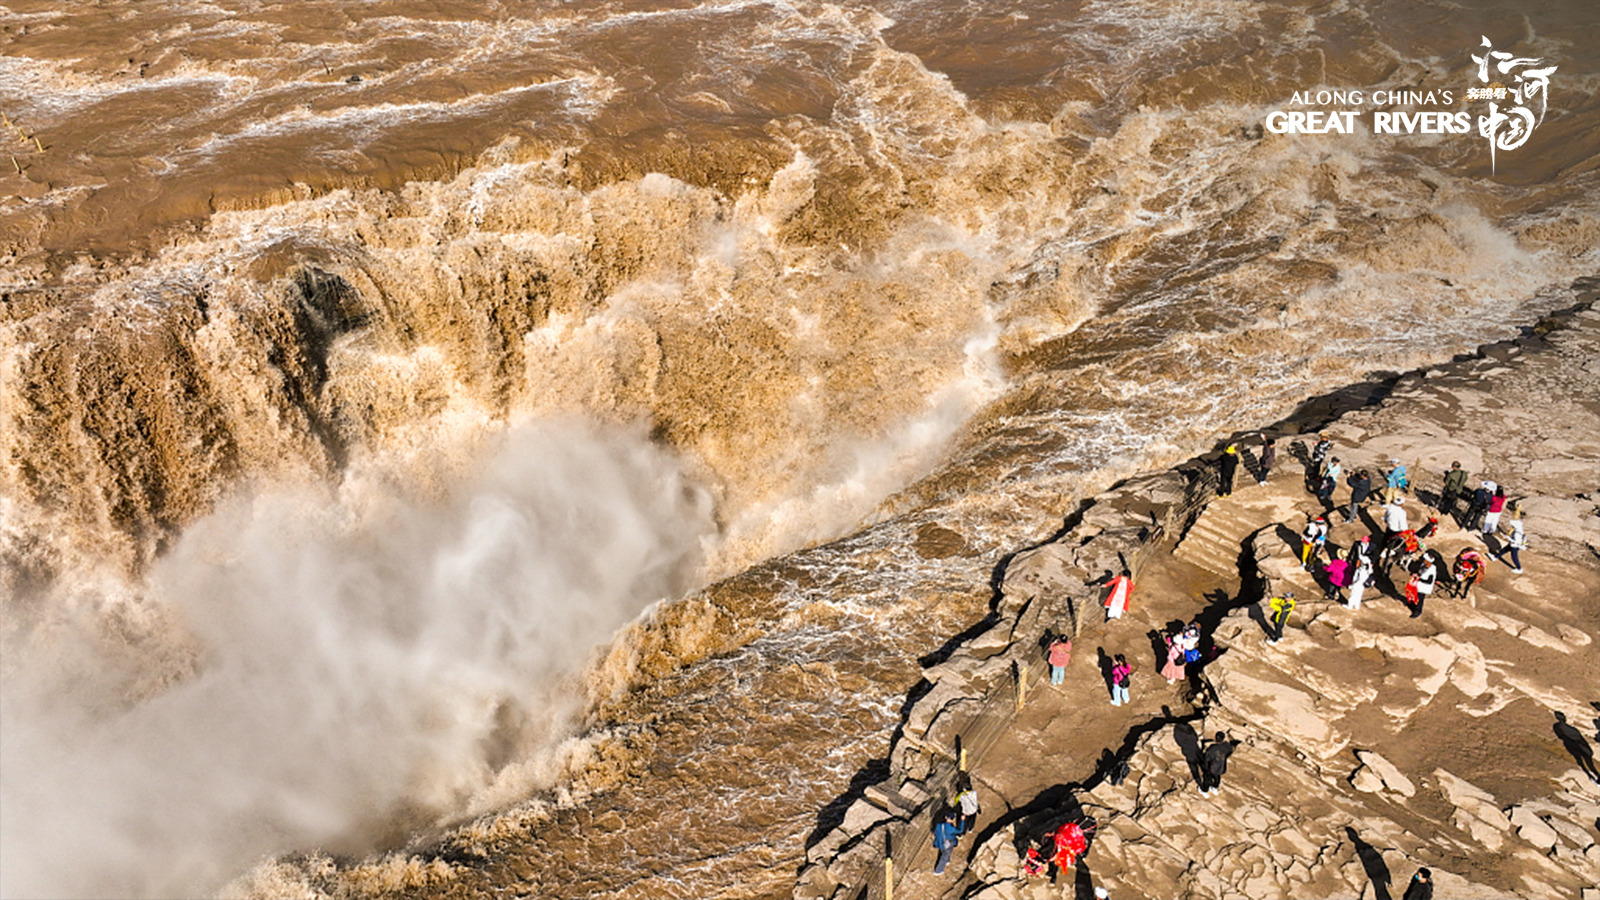 Live: Spectacular view of Hukou Waterfall on Yellow River – Ep. 21